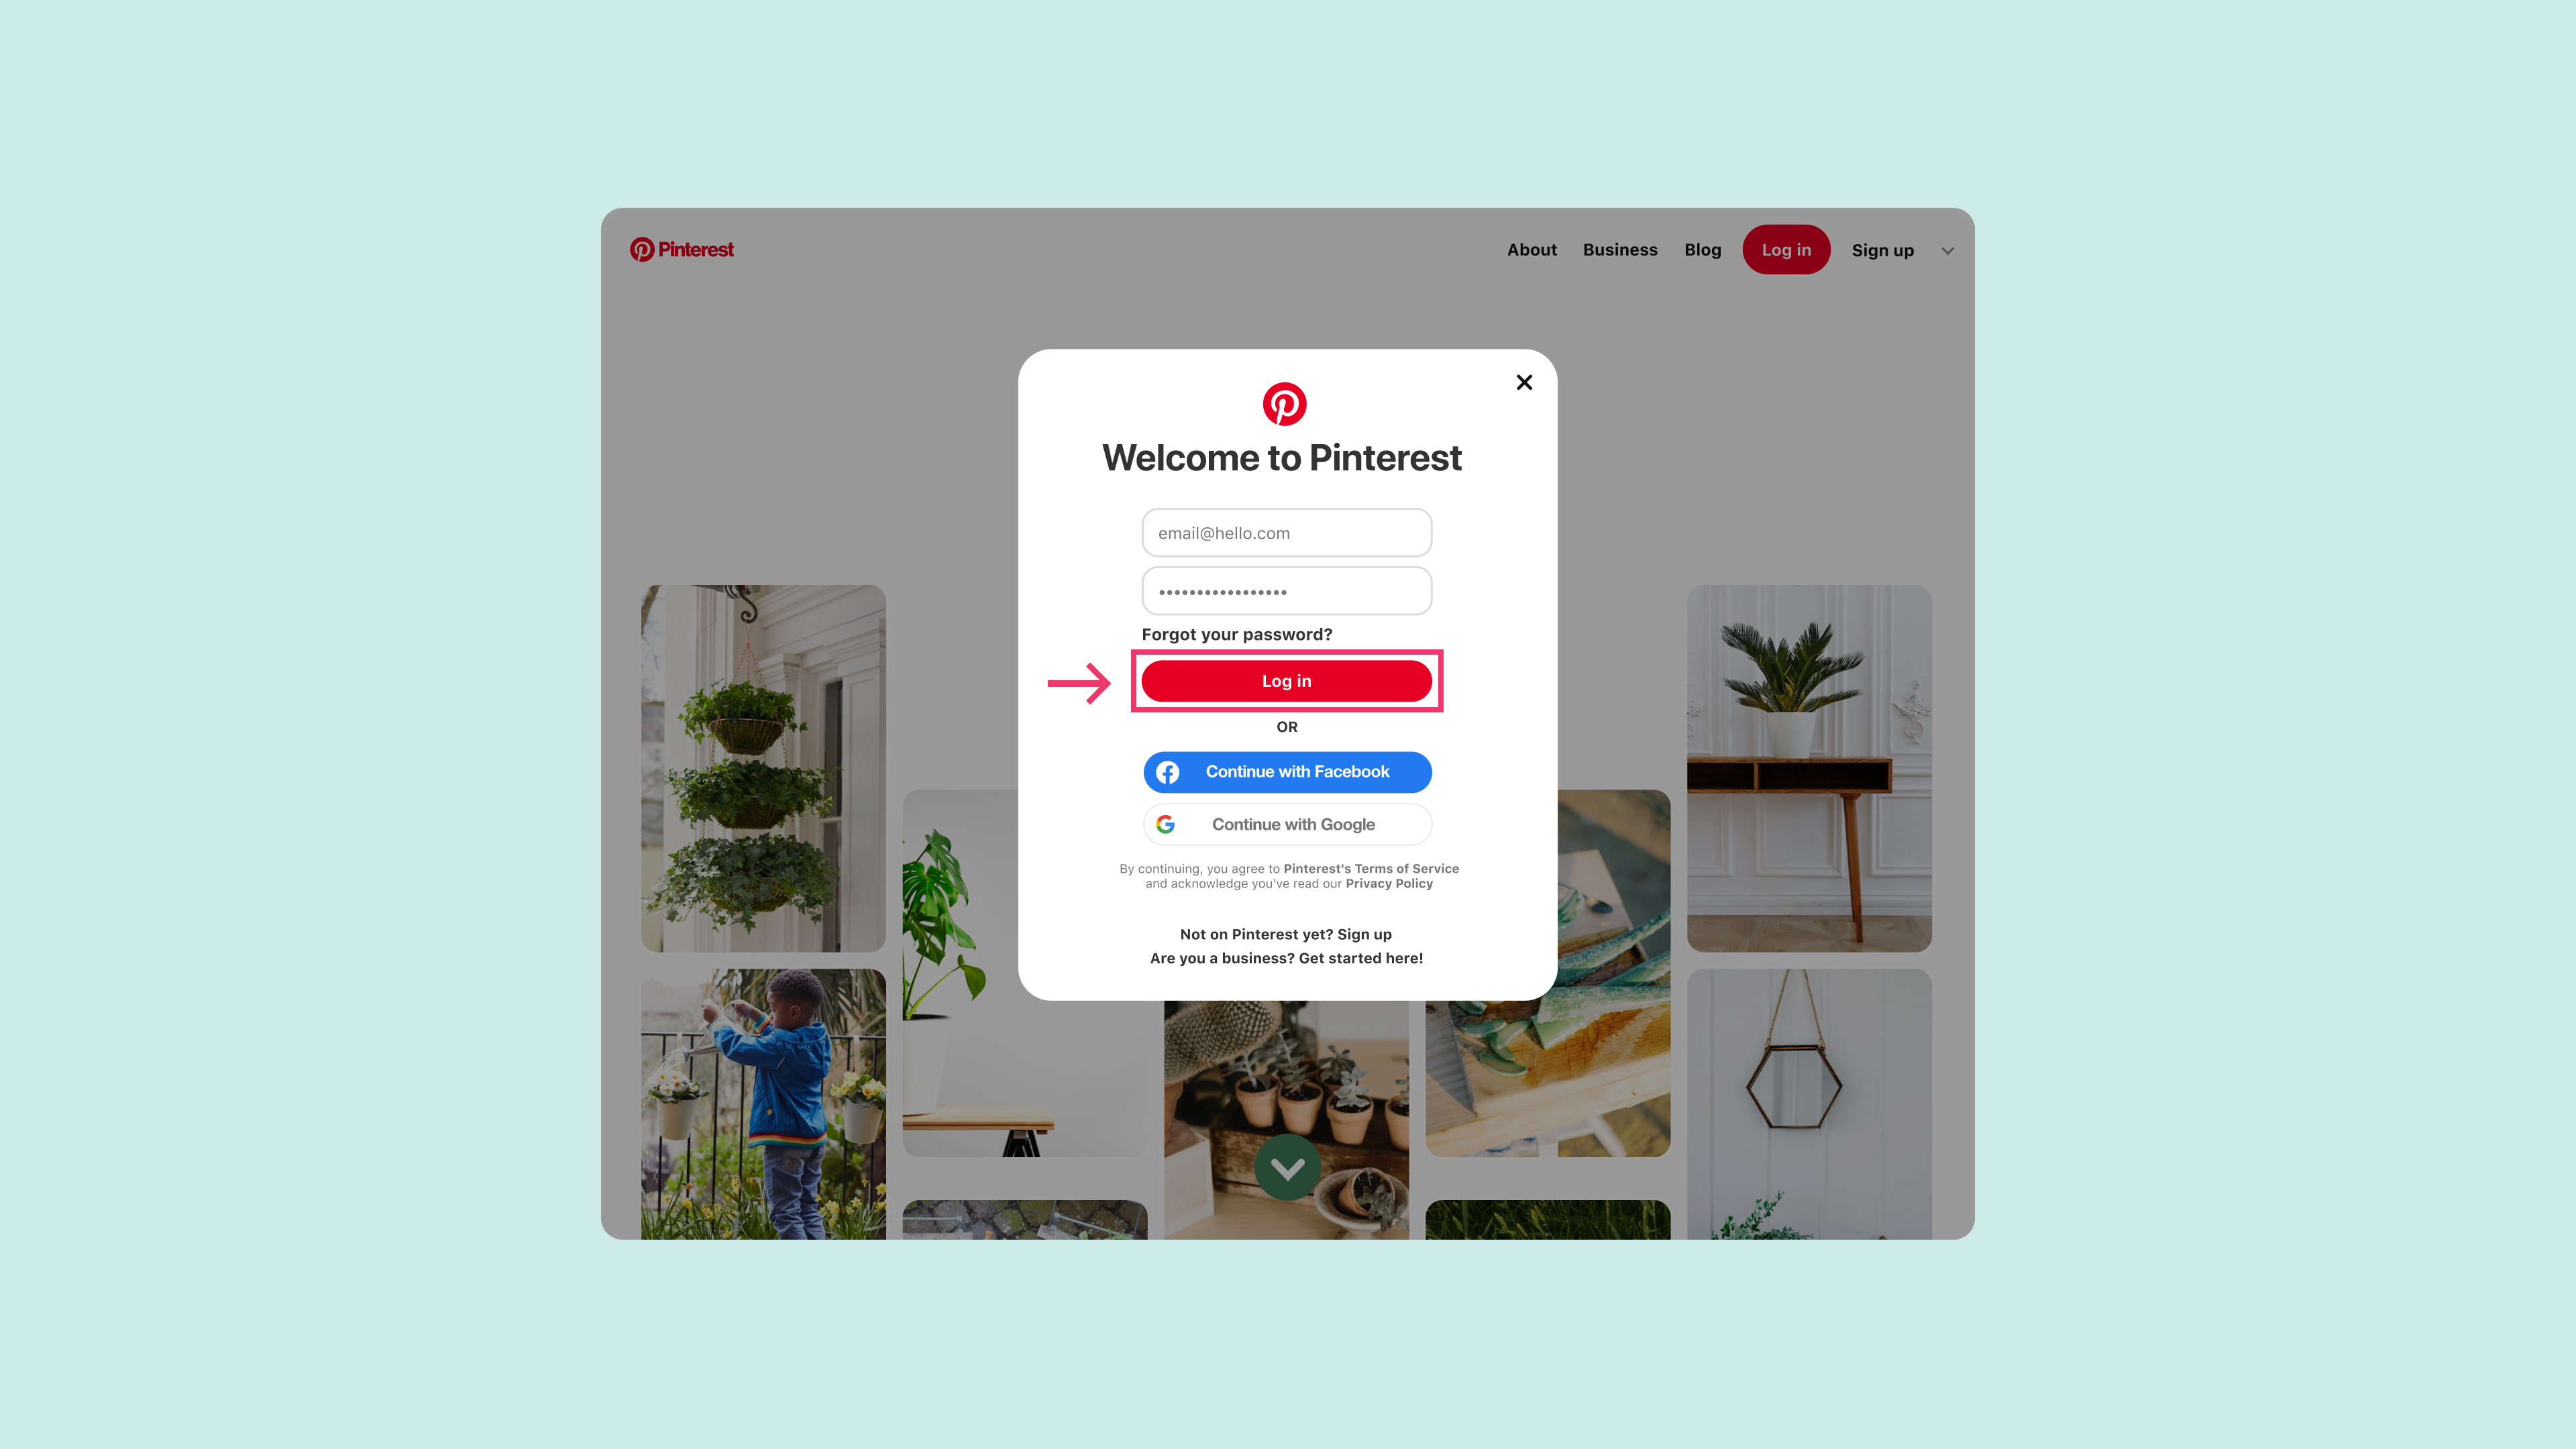 A red arrow pointing to the red Log in button to log into Pinterest.